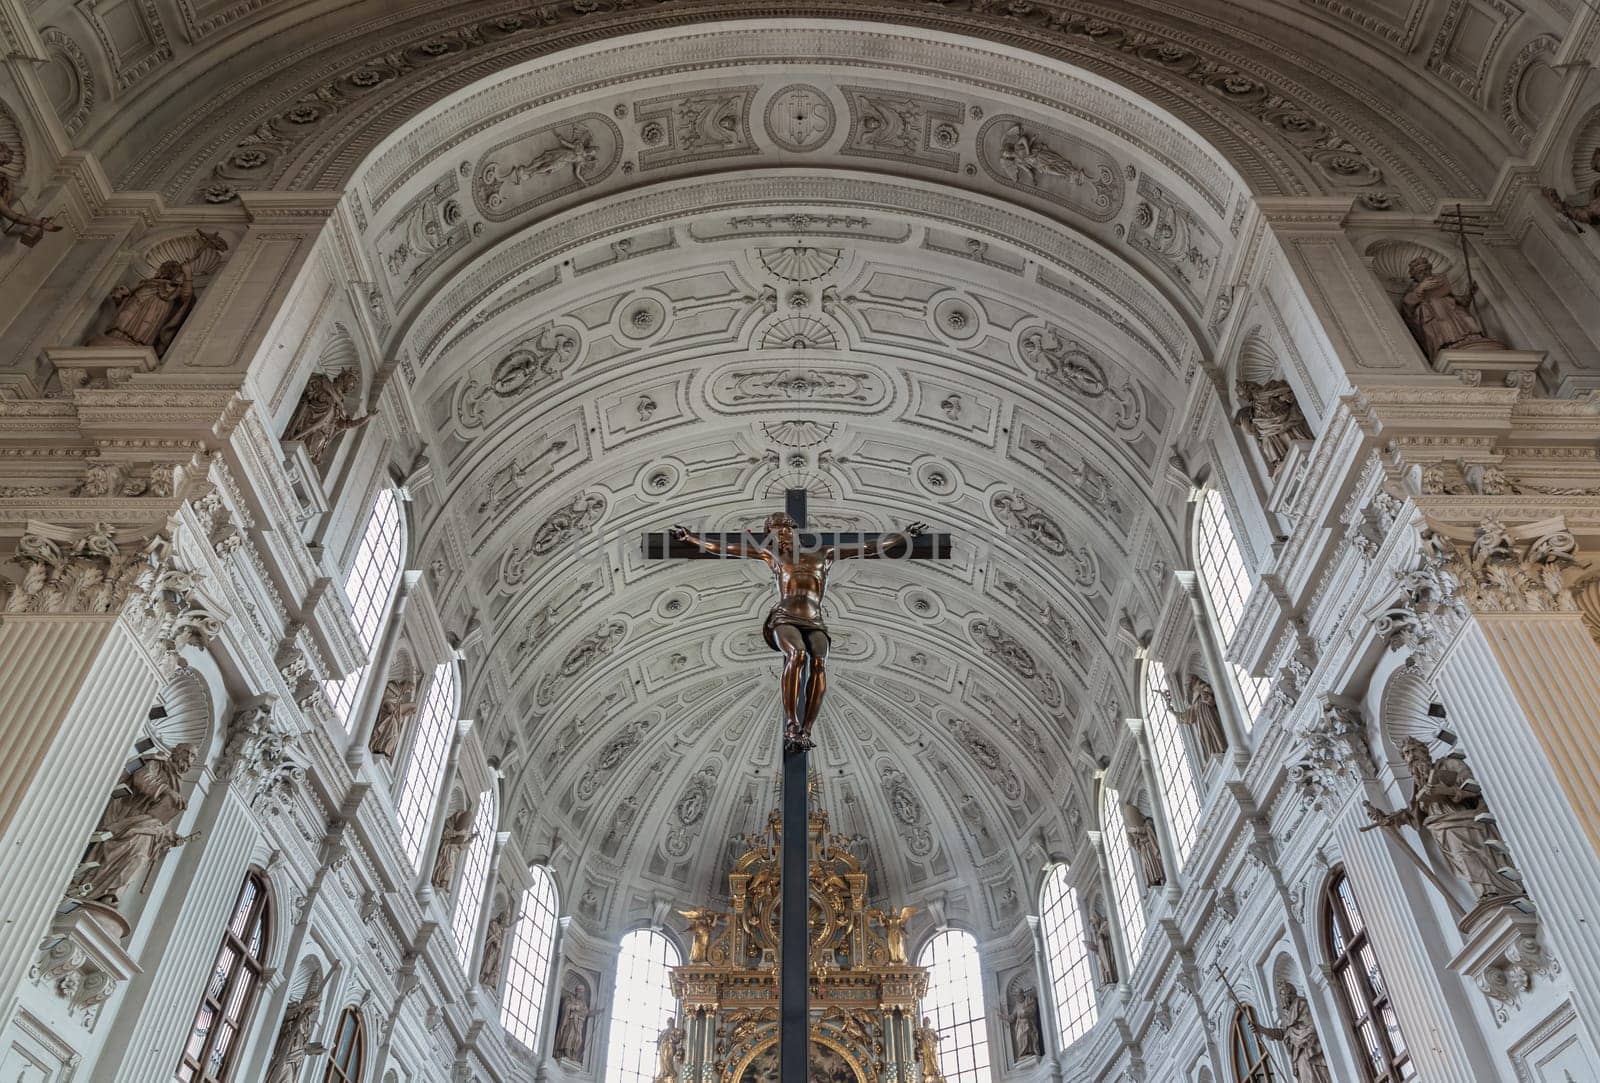 Jesus hanging on the cross, Crucifix in the interior of St. Michael's Church (Michaelskirche Jesuit church) in Munich. by tosirikul